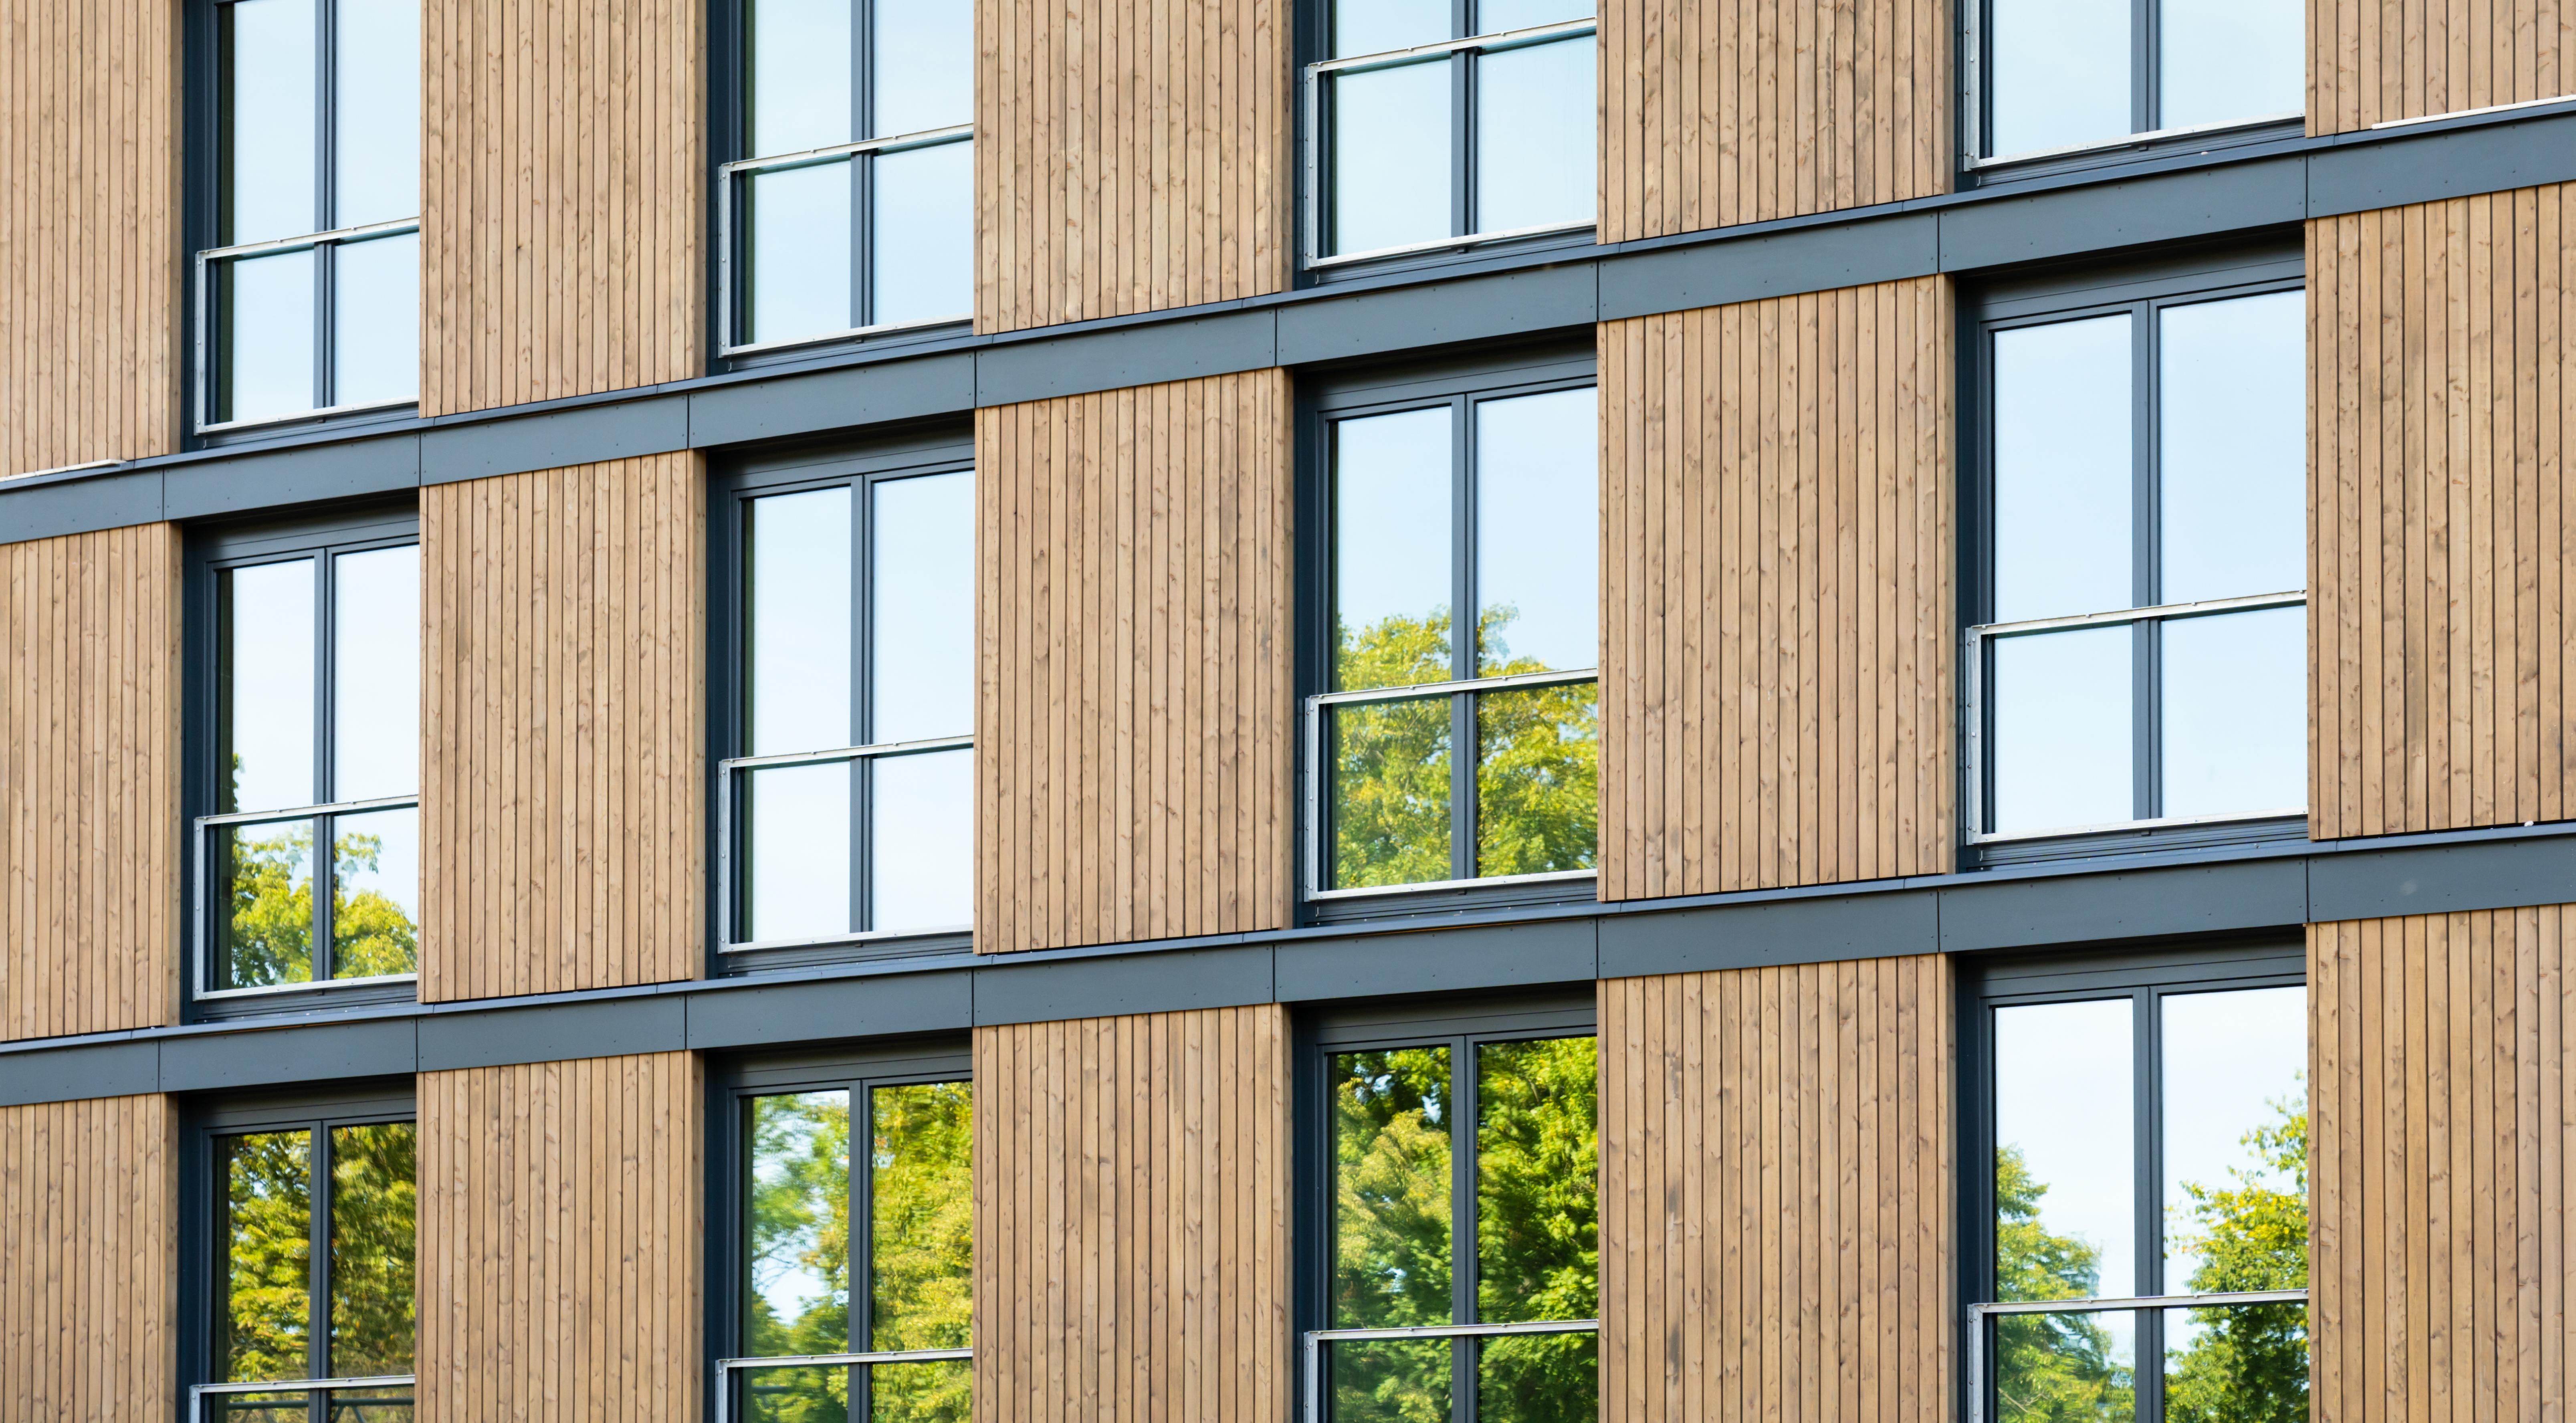 Apartment building with a wood facade.